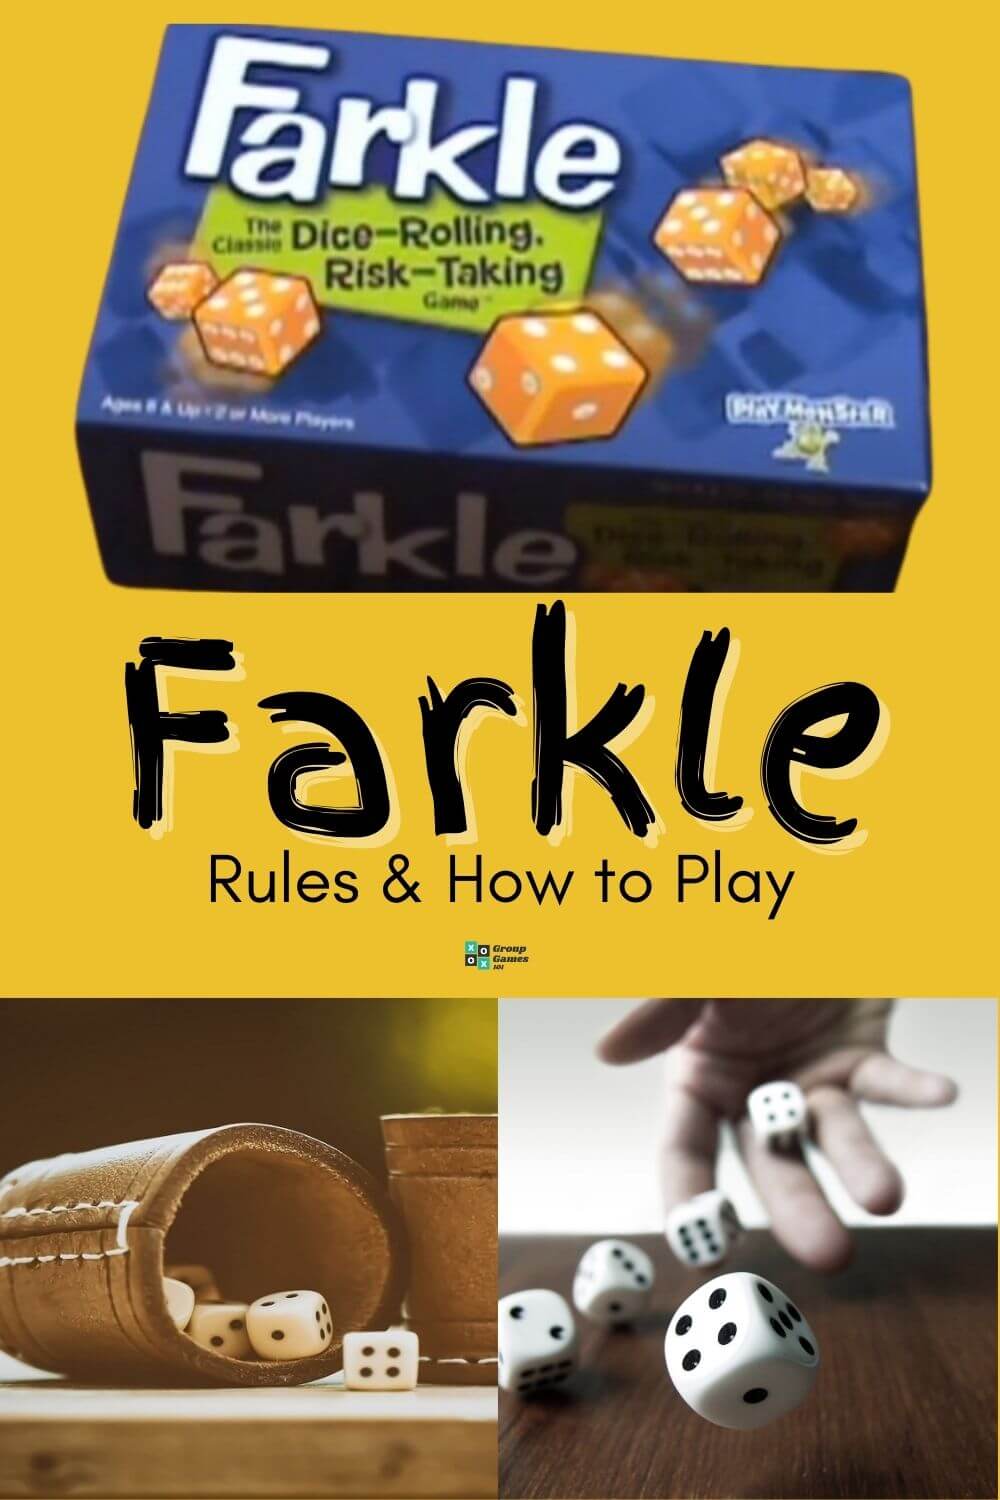 farkle-rules-and-scoring-learn-how-to-play-this-fun-dice-game